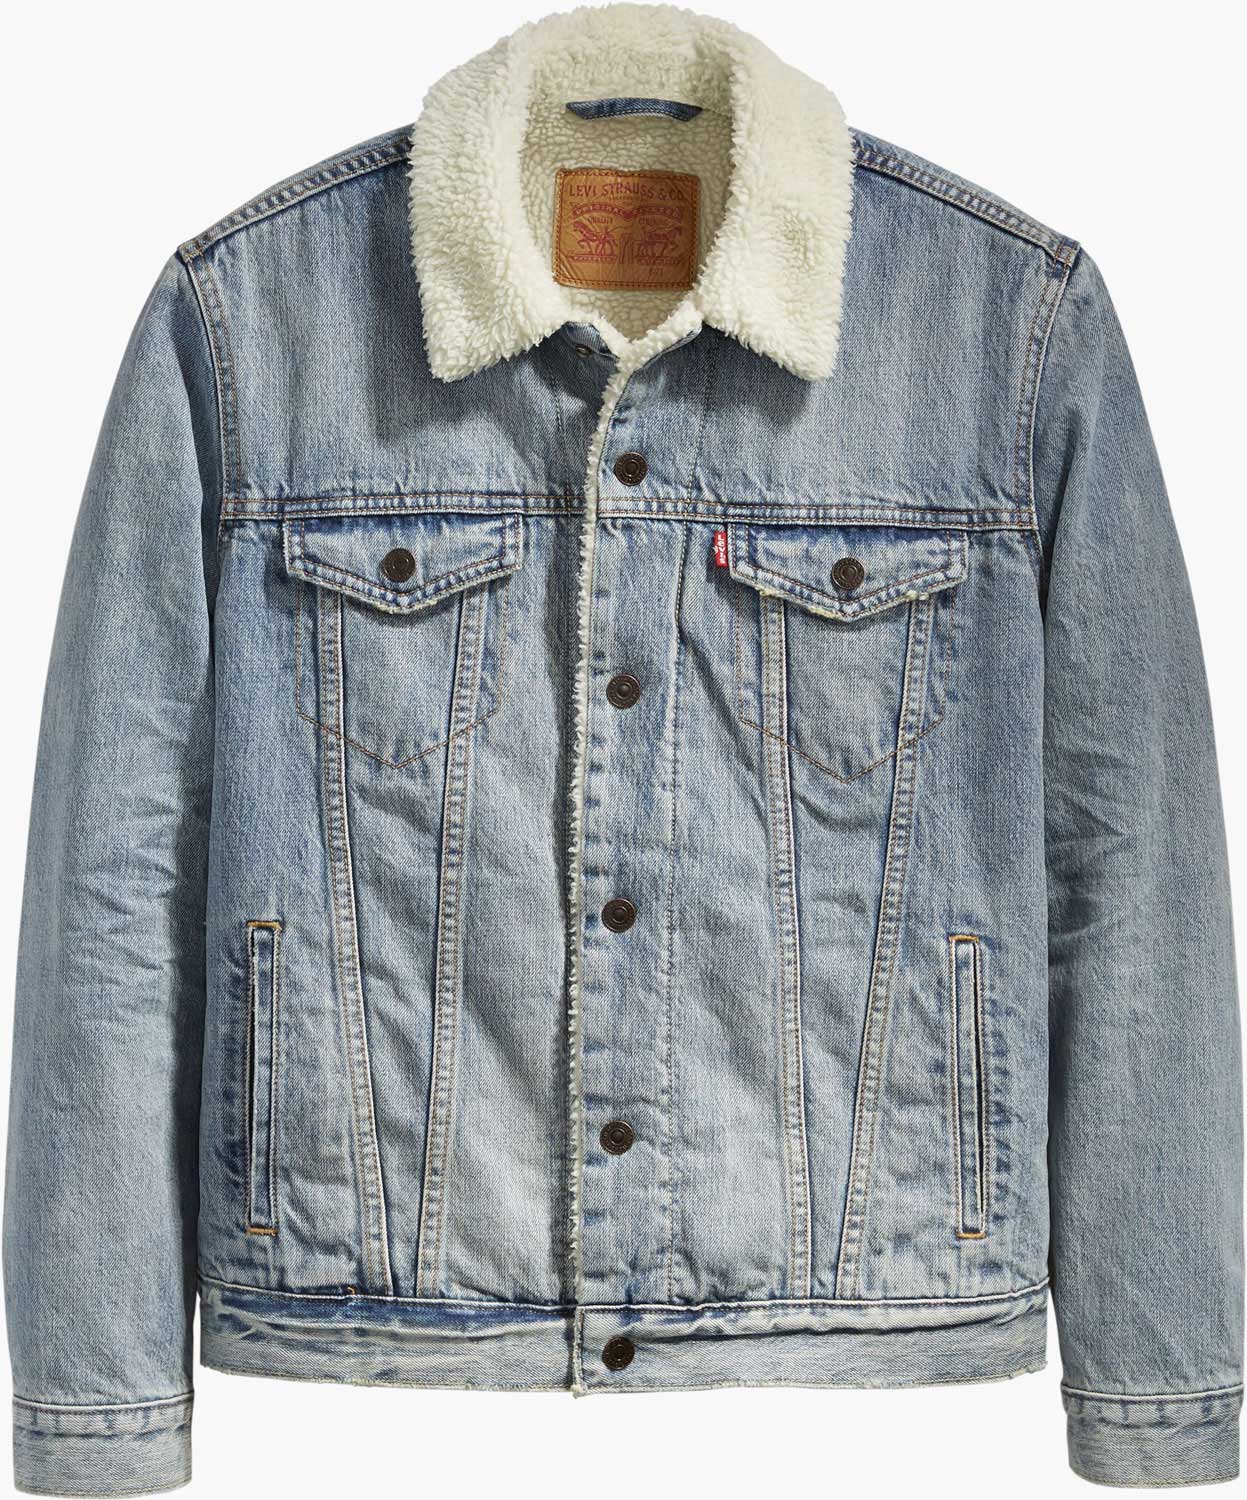 Find Of The Week: Levi’s Sherpa Borg Denim Jacket – THE JEANS BLOG